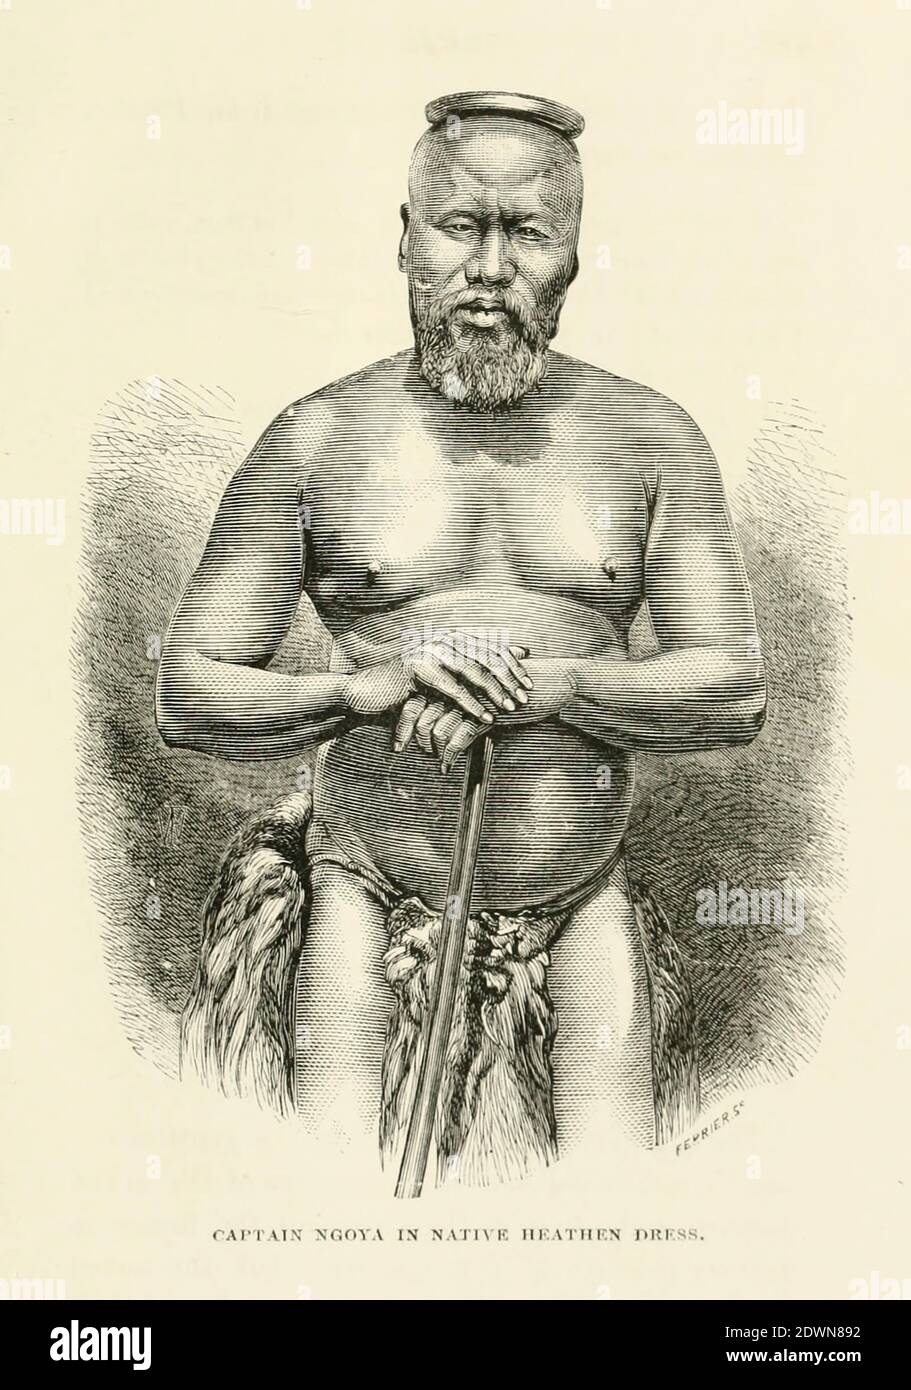 Captain Ngoya, In Native Heathen Dress From the Book 'Christian adventures in South Africa' by Reverend William Taylor, 1821-1902. Published in New York by Nelson & Phillips 1877 Stock Photo